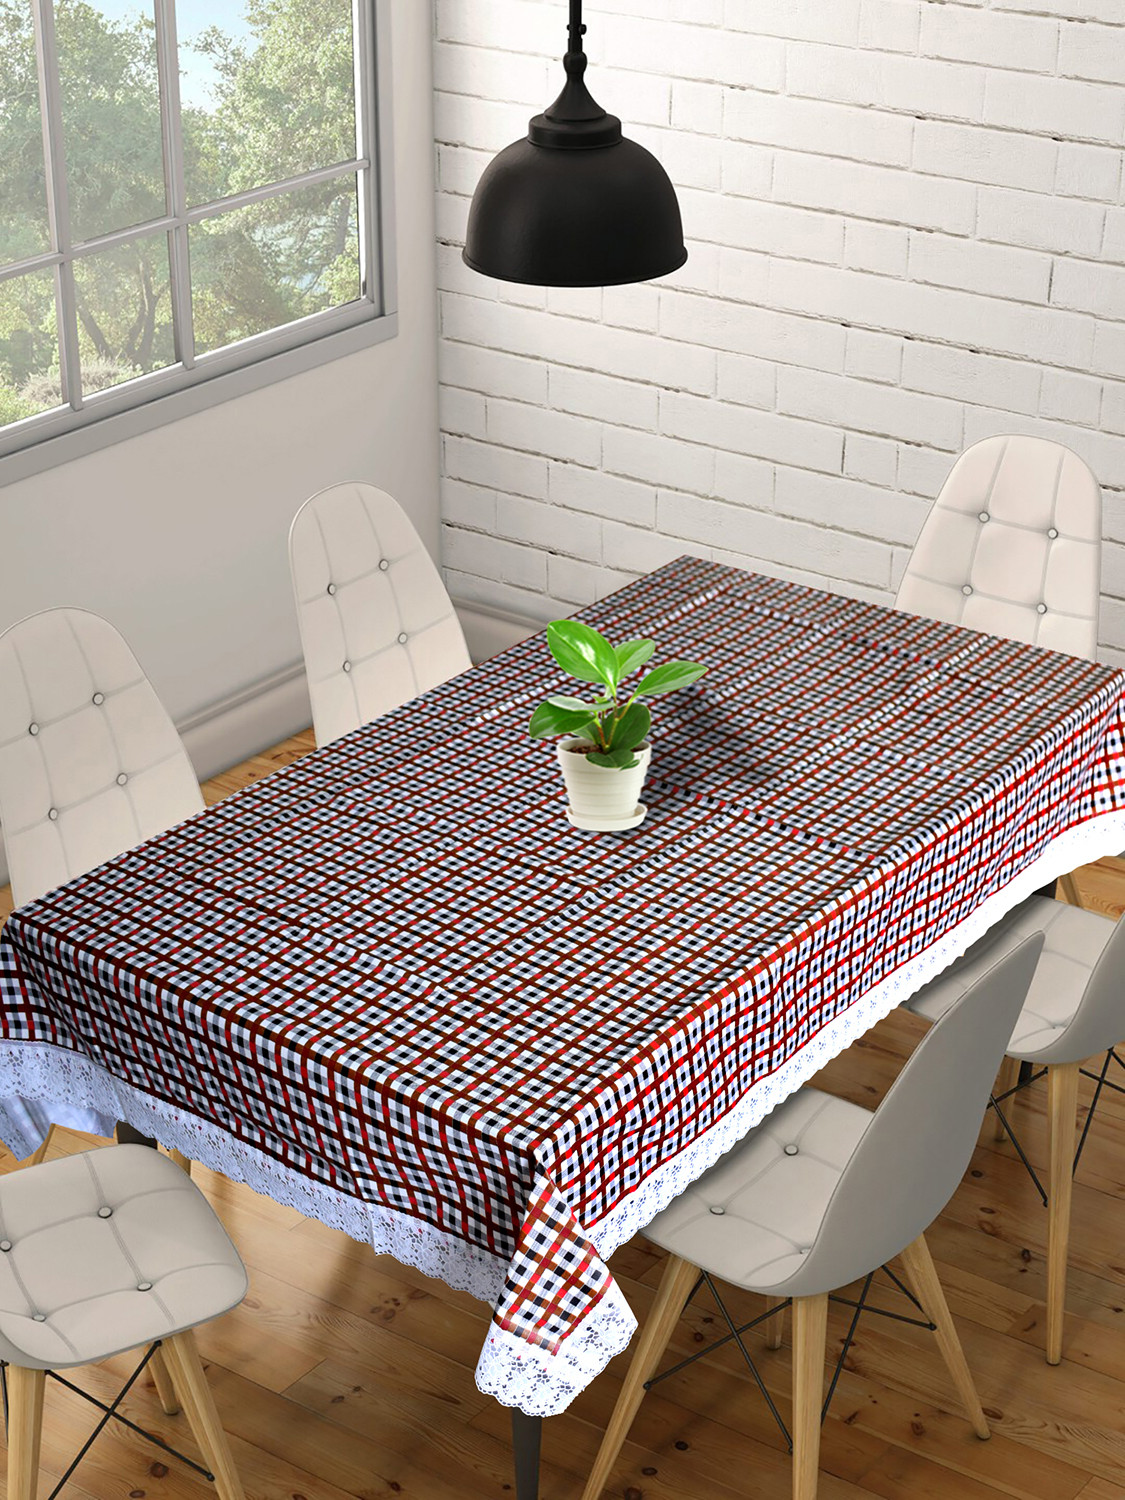 Kuber Industries Check Printed PVC 6 Seater Dinning Table Cover, Protector With White Lace Border, 60